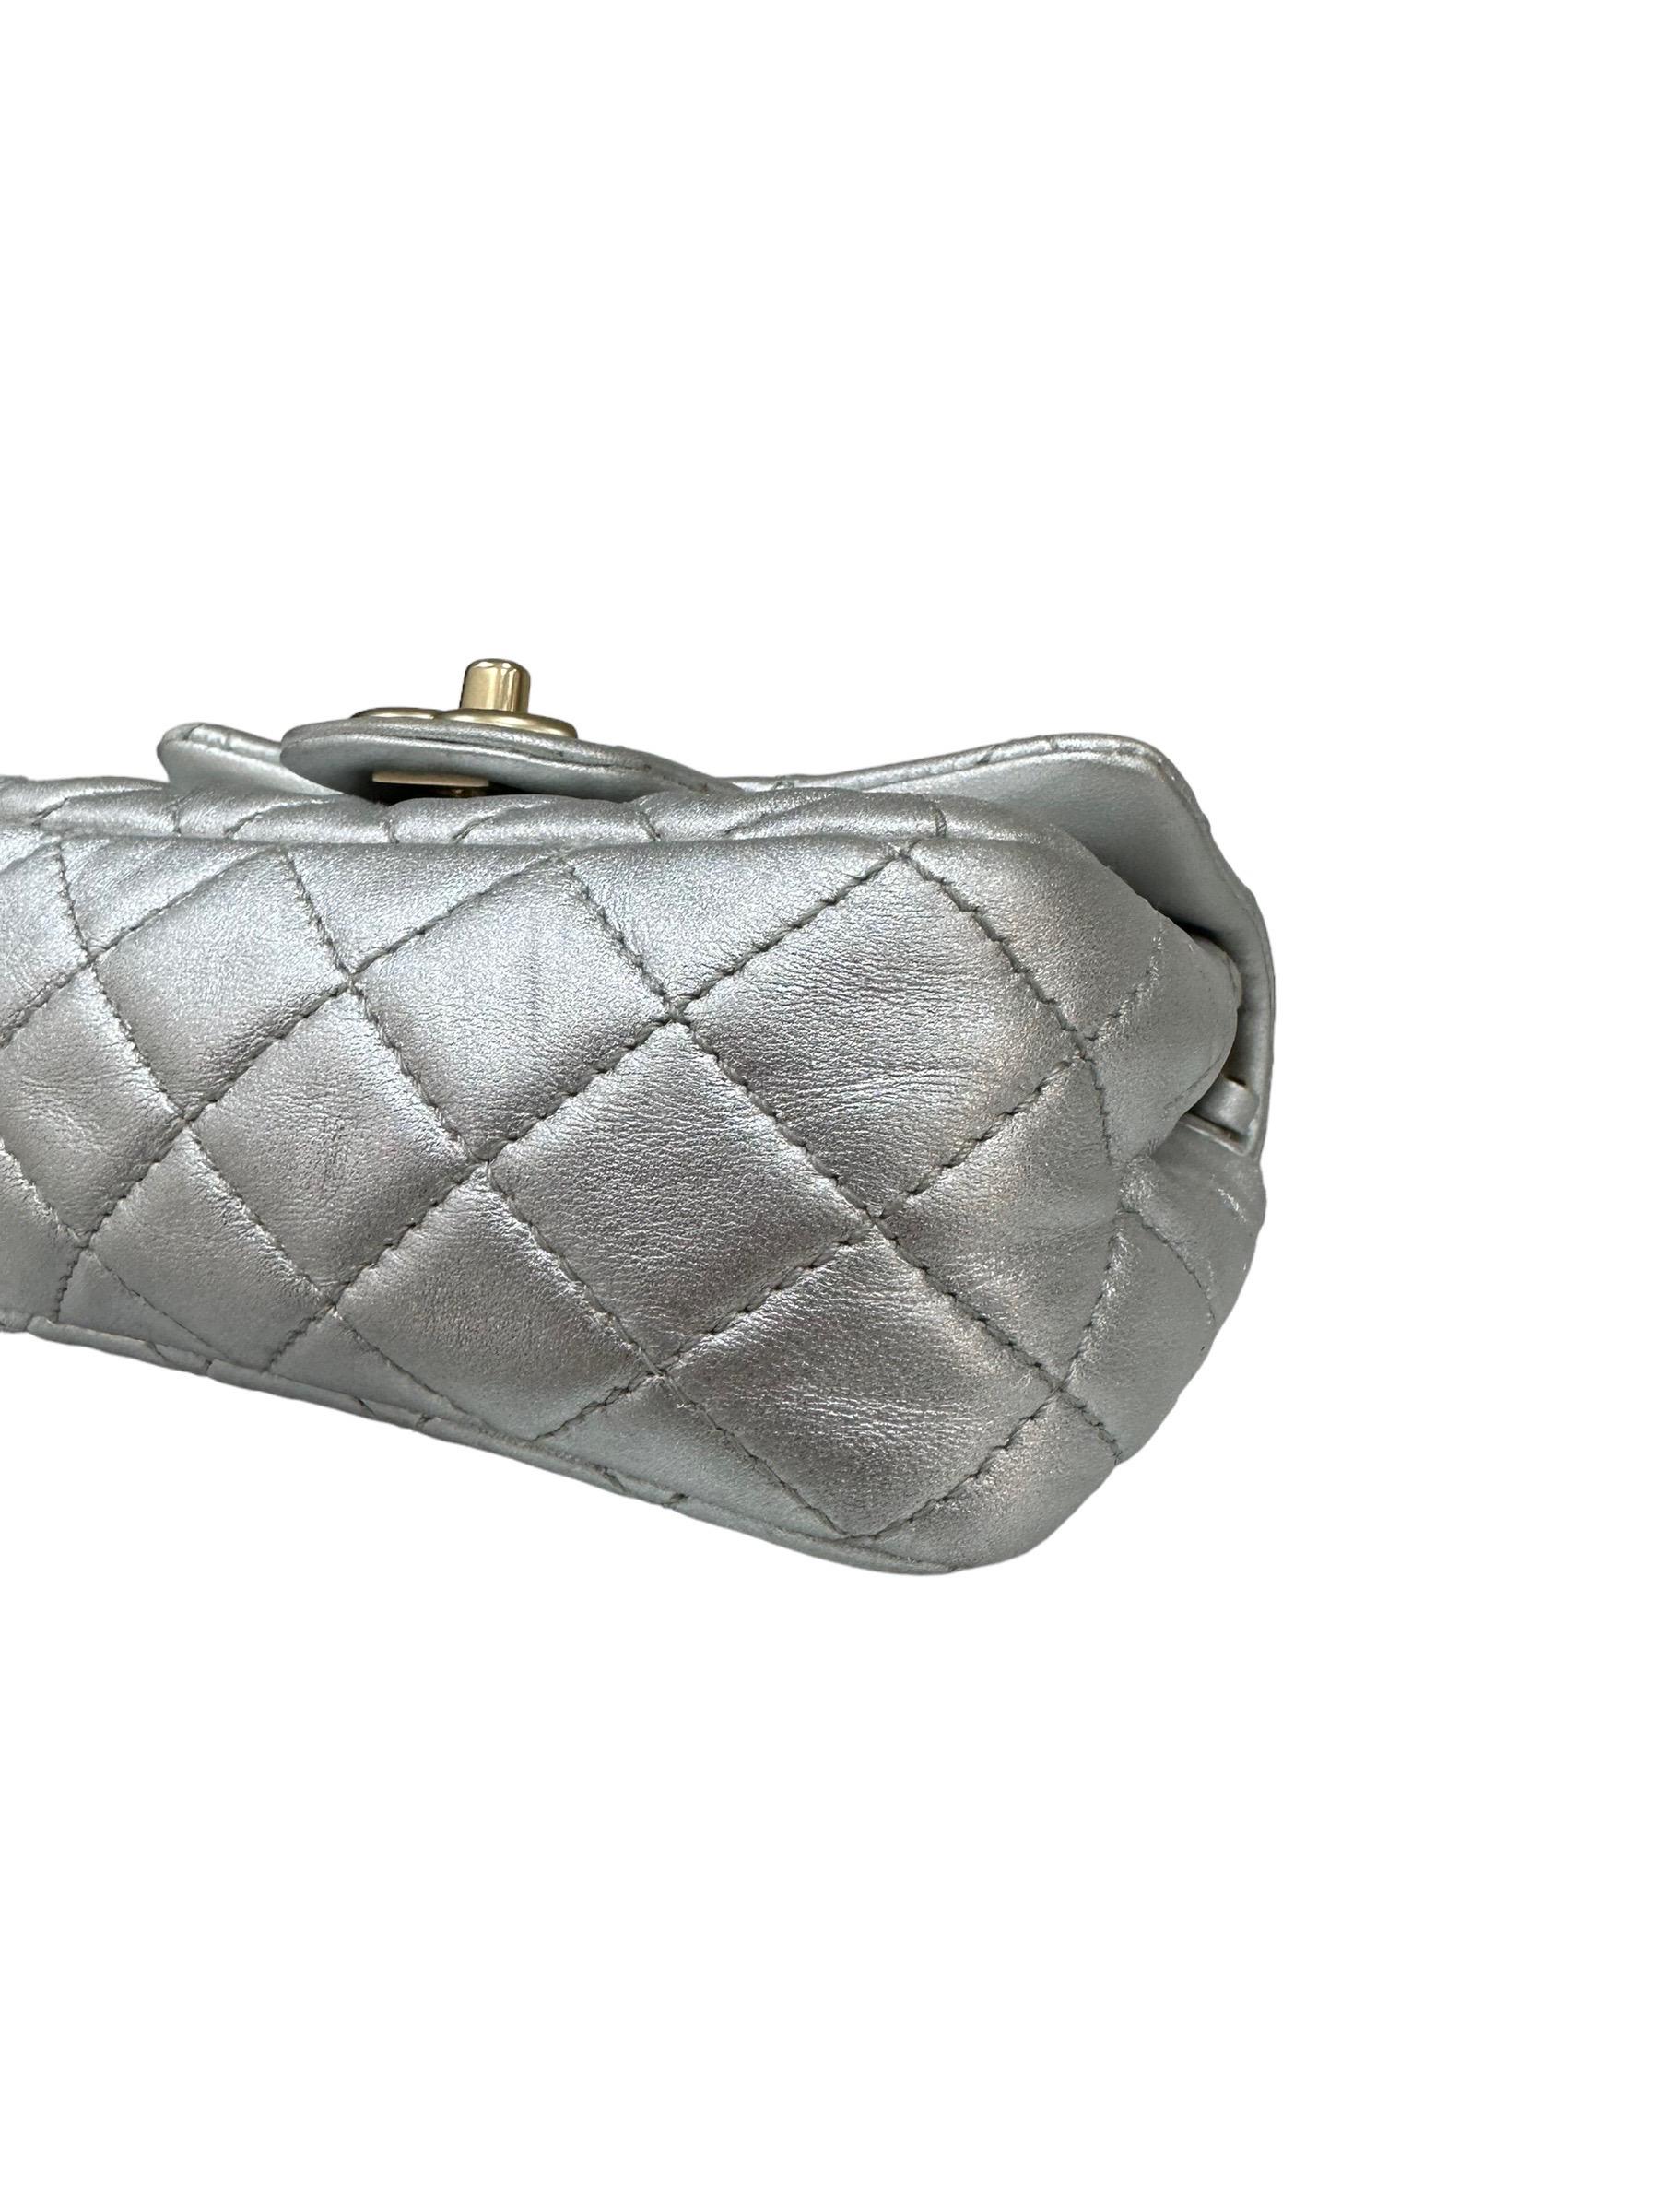 2009 Chanel Timeless Mini Flap Silver Leather  5